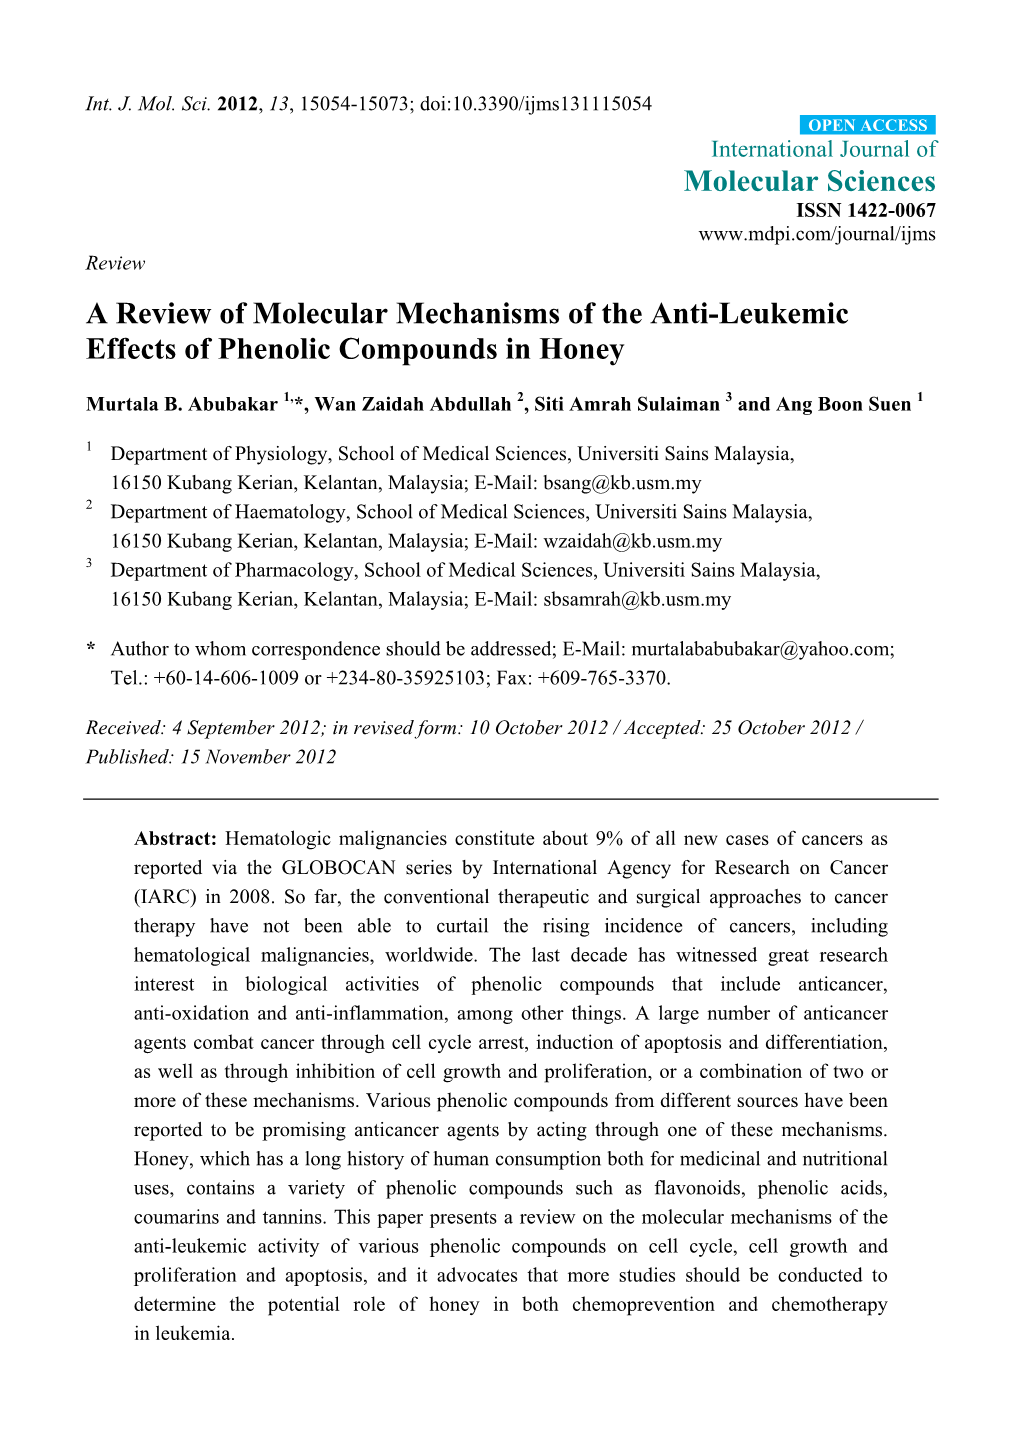 A Review of Molecular Mechanisms of the Anti-Leukemic Effects of Phenolic Compounds in Honey